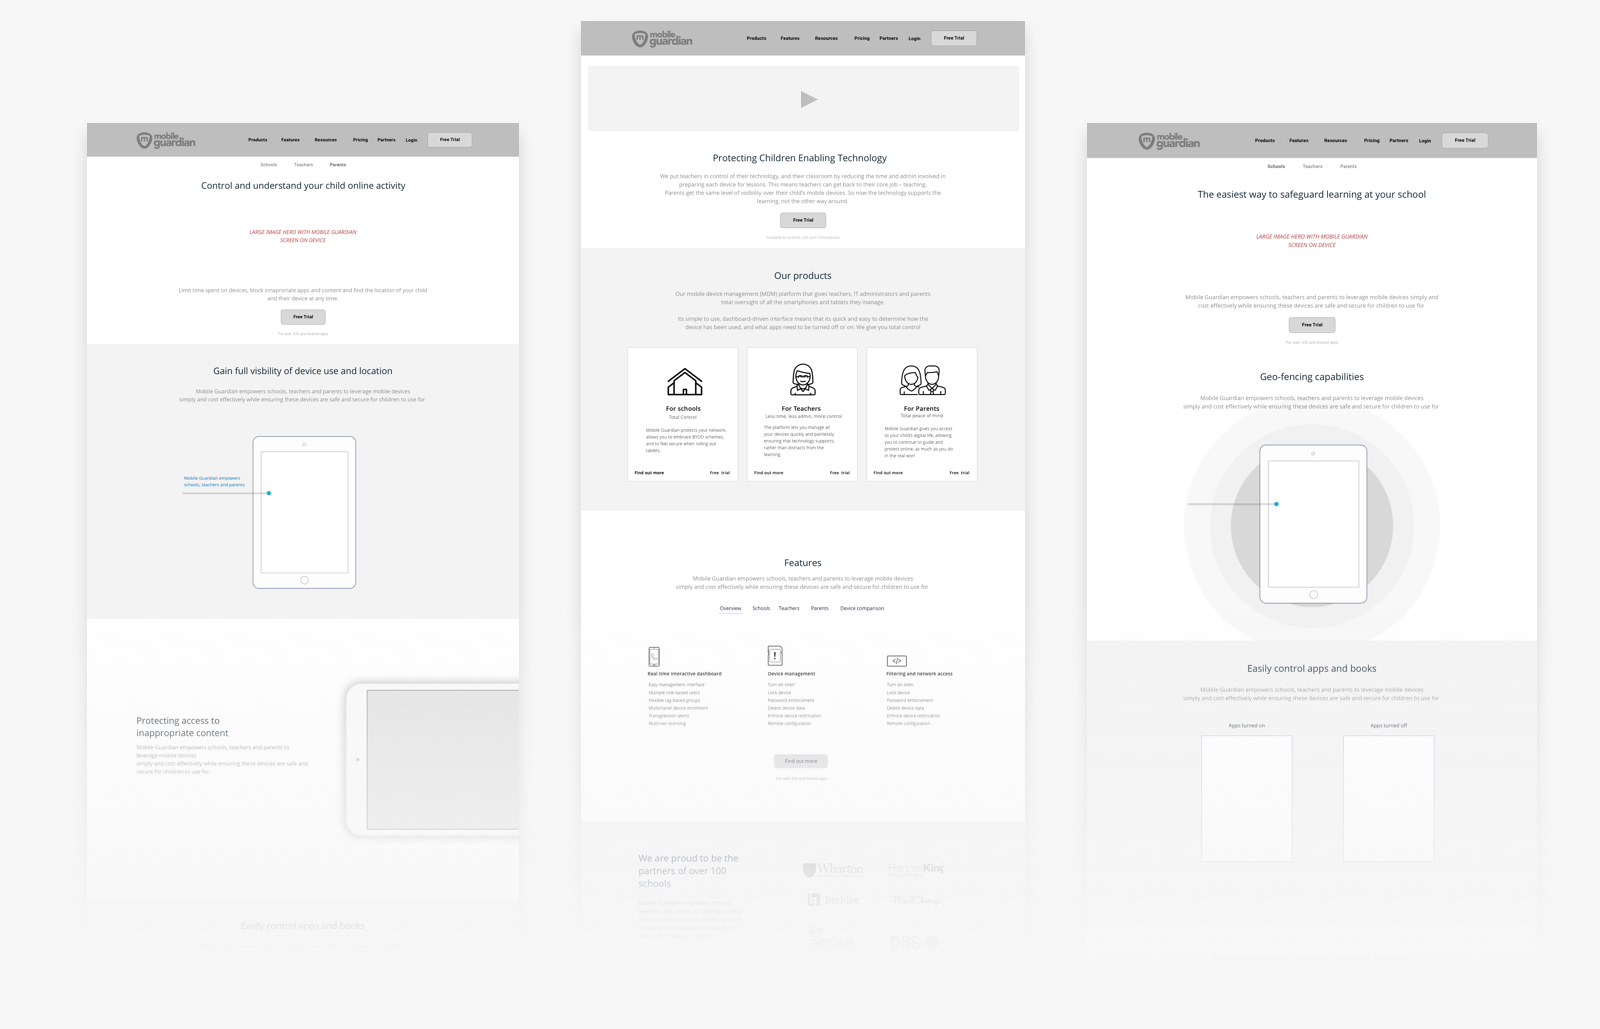 Mobile Guardian Web Screens showing the UX design process